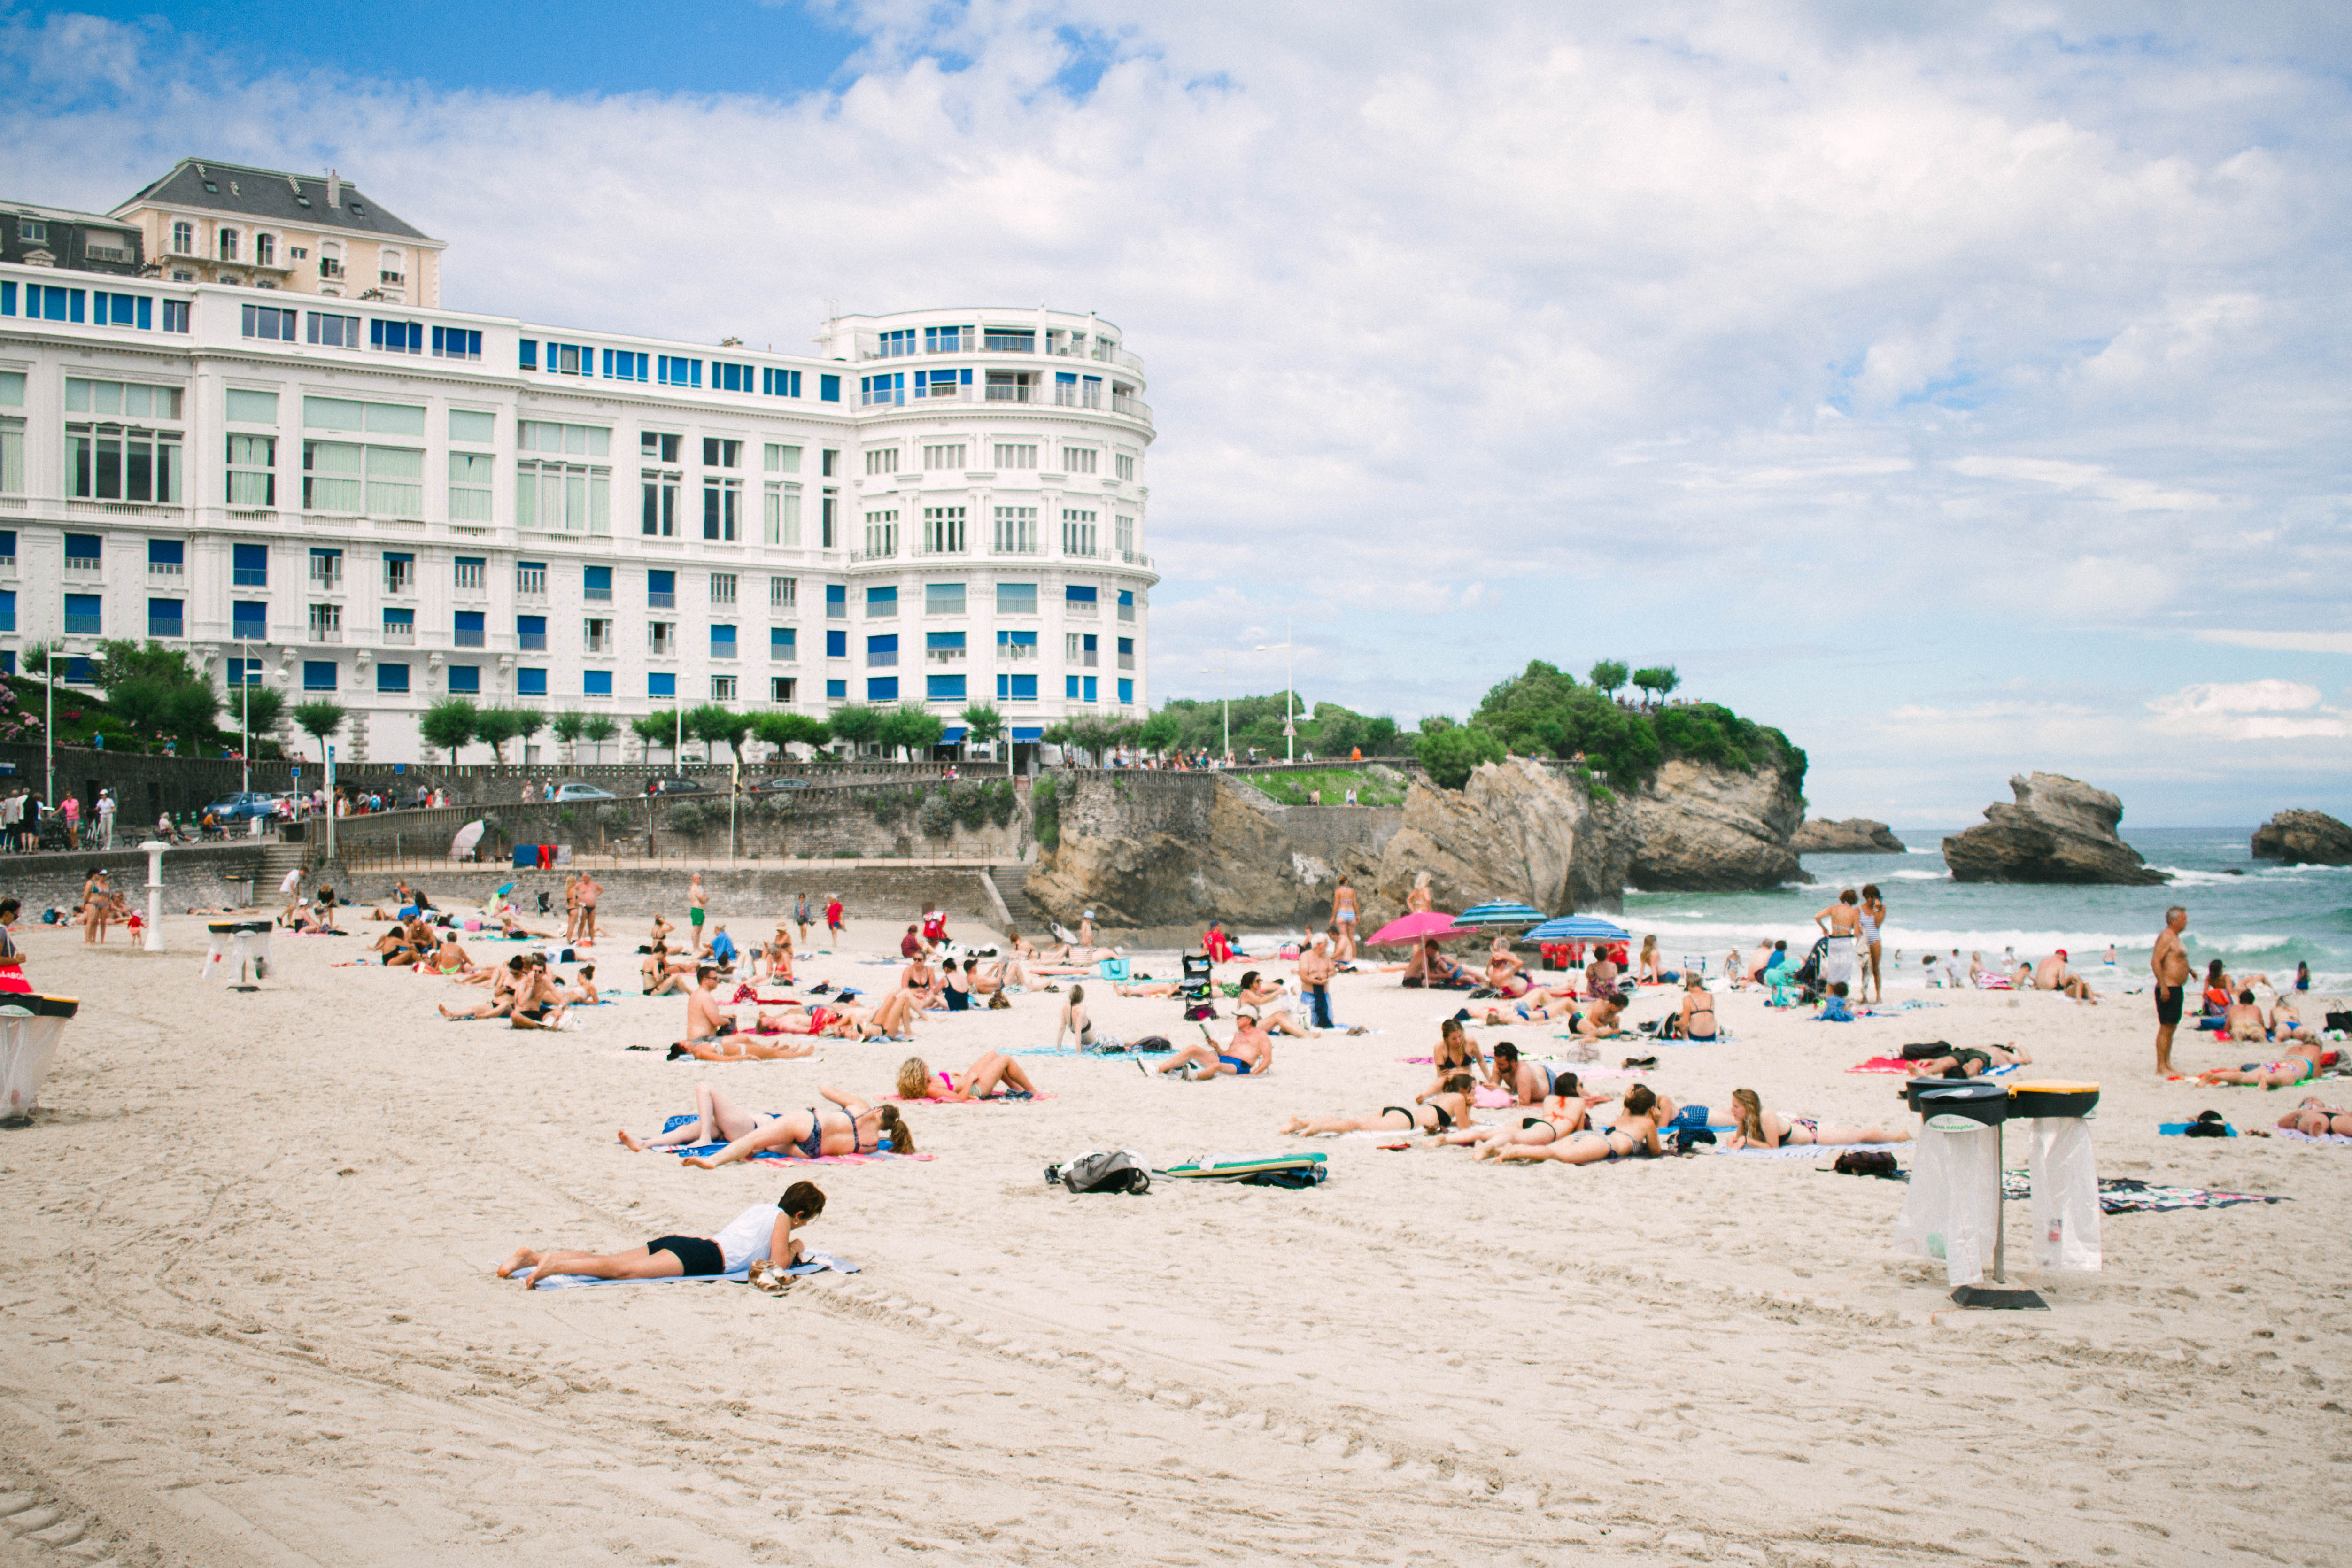 Surf. Stay. Play: Biarritz, France